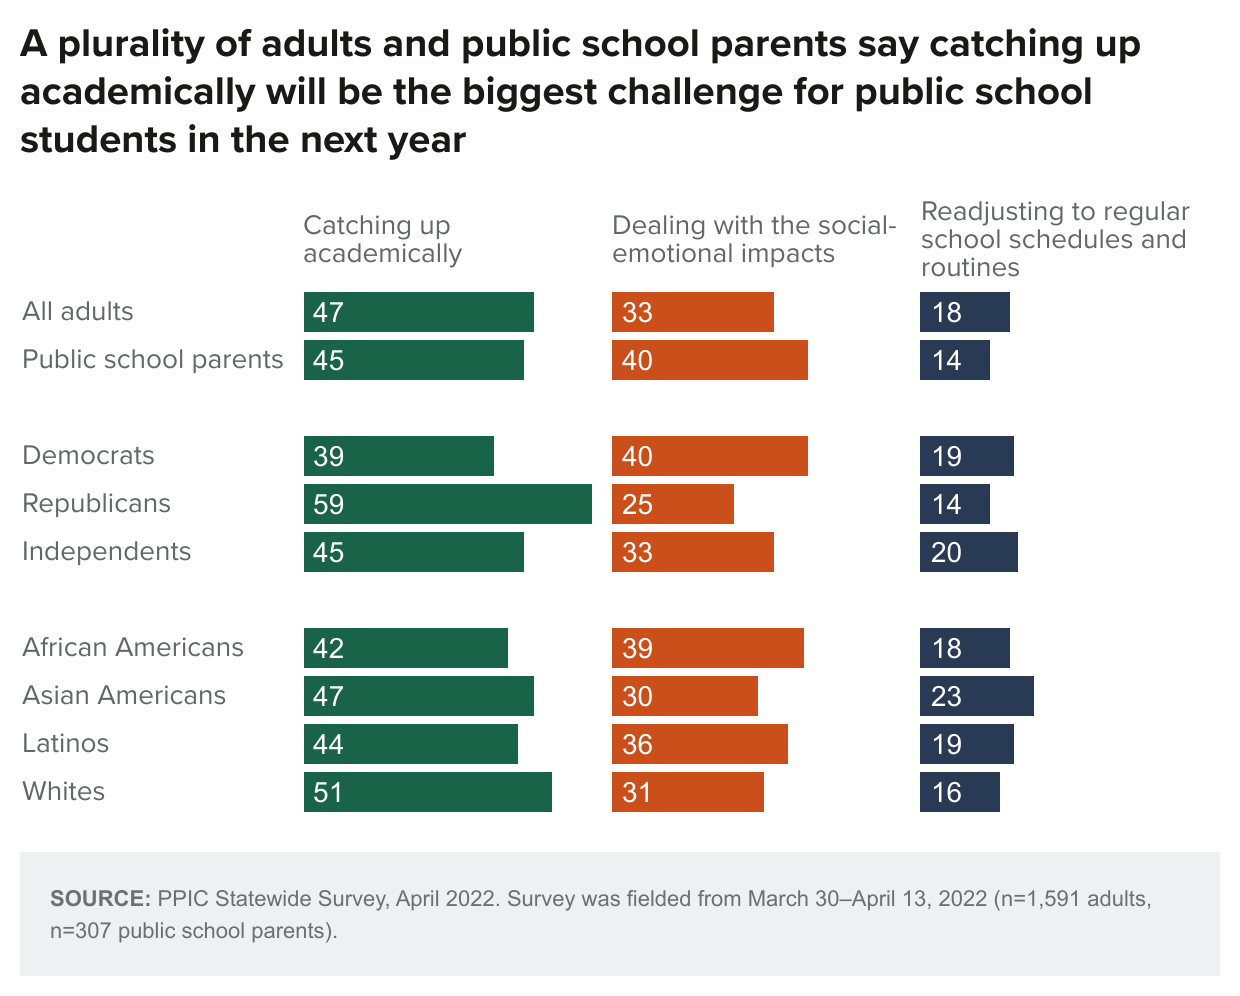 figure - A plurality of adults and public school parents say catching up academically will be the biggest challenge for public school students in the next year